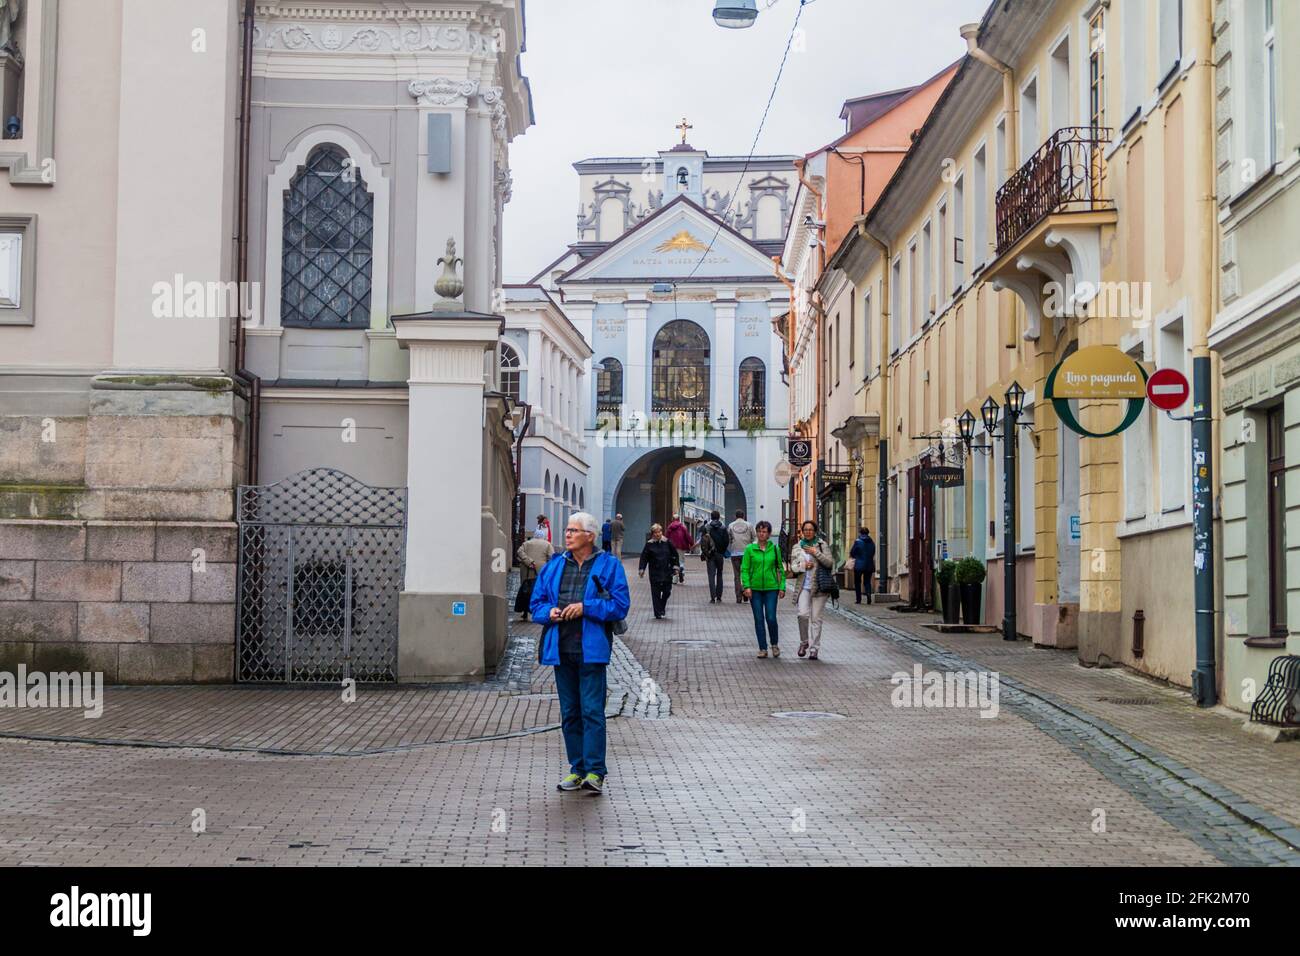 VILNIUS, LITHUANIA - AUGUST 16, 2016: Northern side of the Gate of Dawn in Vilnius, Lithuania. Stock Photo